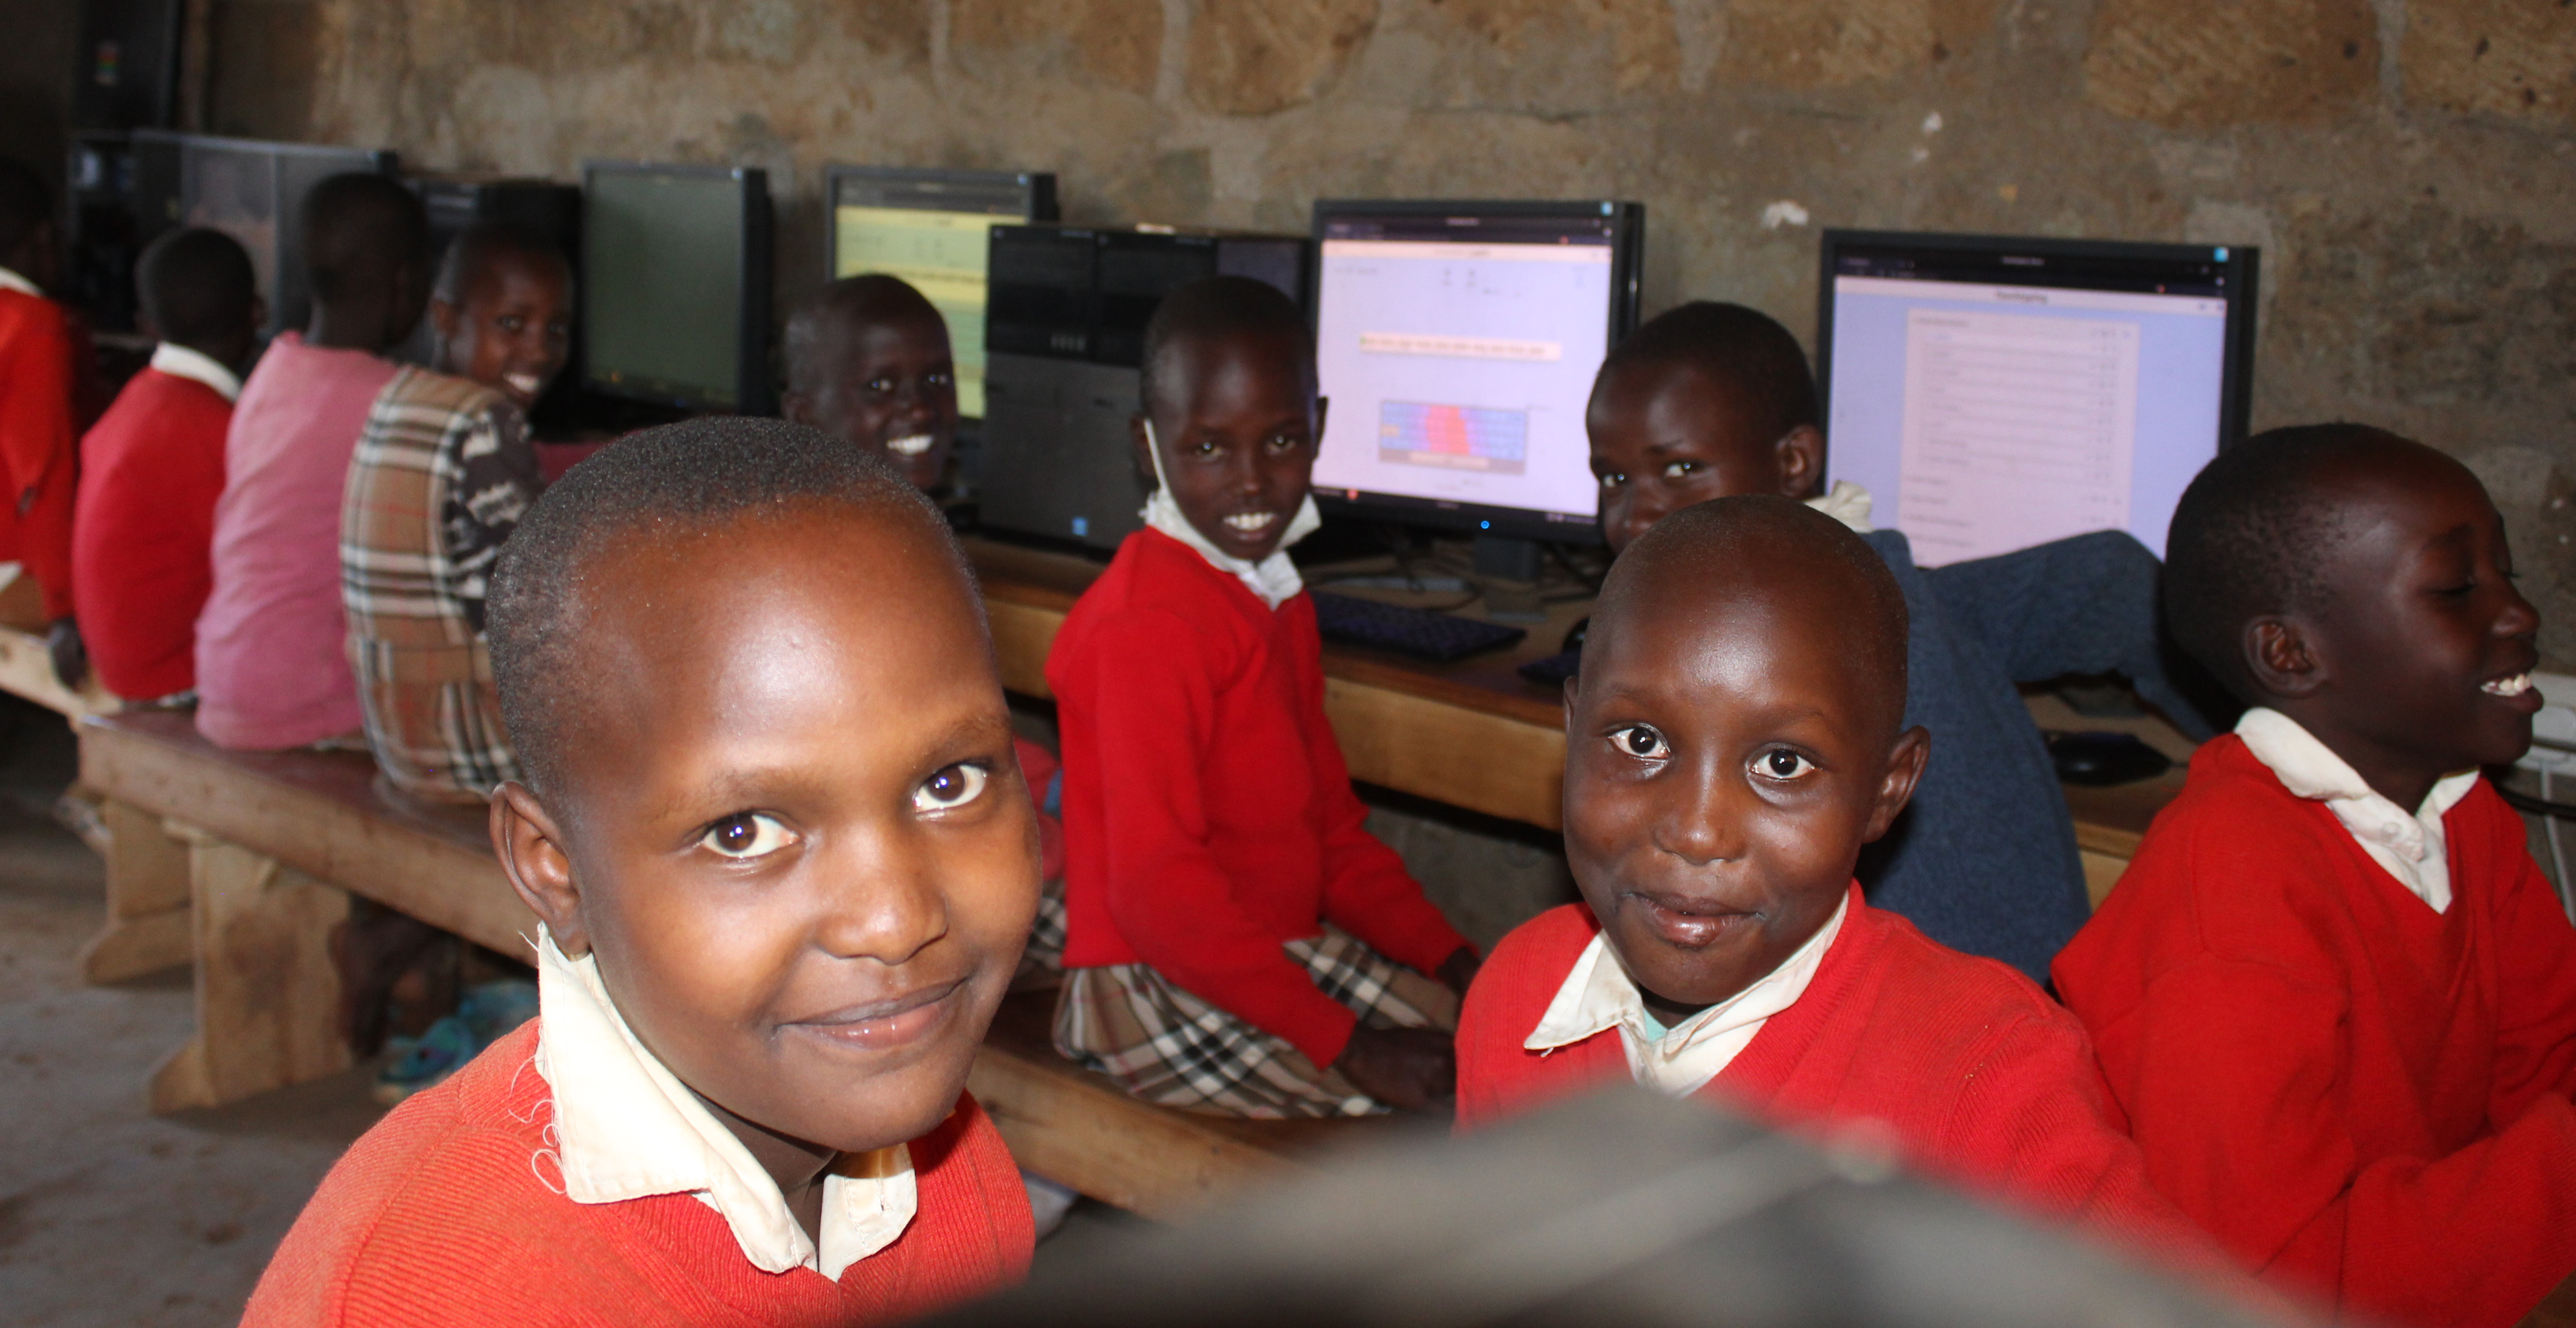 Primary Schools Students at Logiri Primary in Mogotio at TechLit computer lab learning Digital Literacy